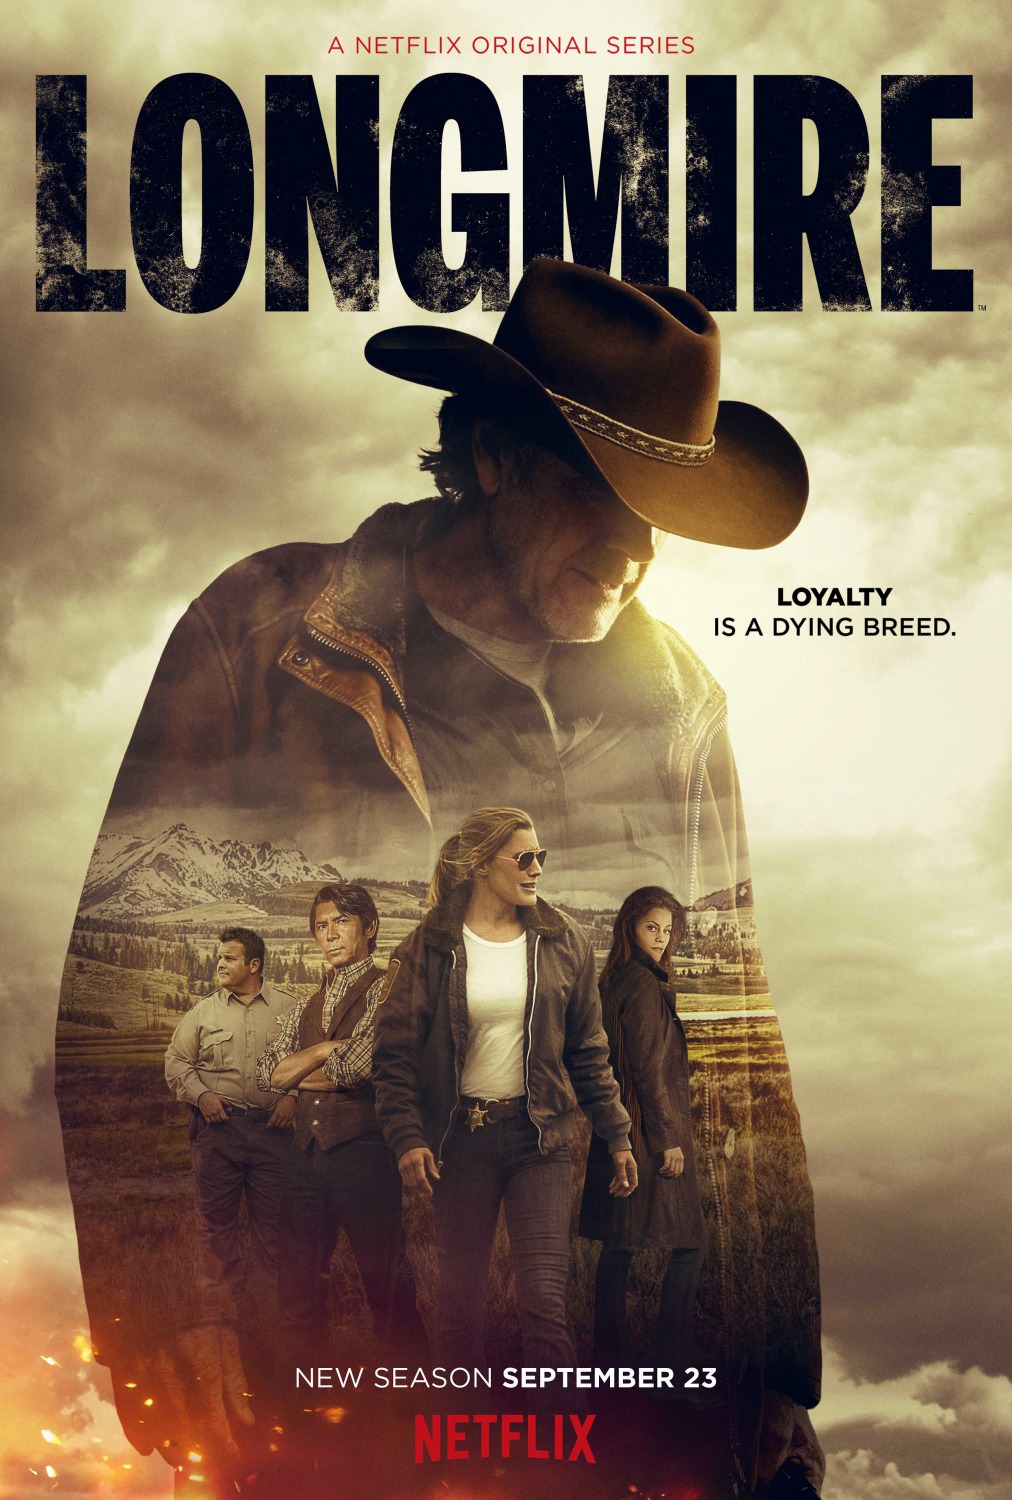 Extra Large TV Poster Image for Longmire (#8 of 8)